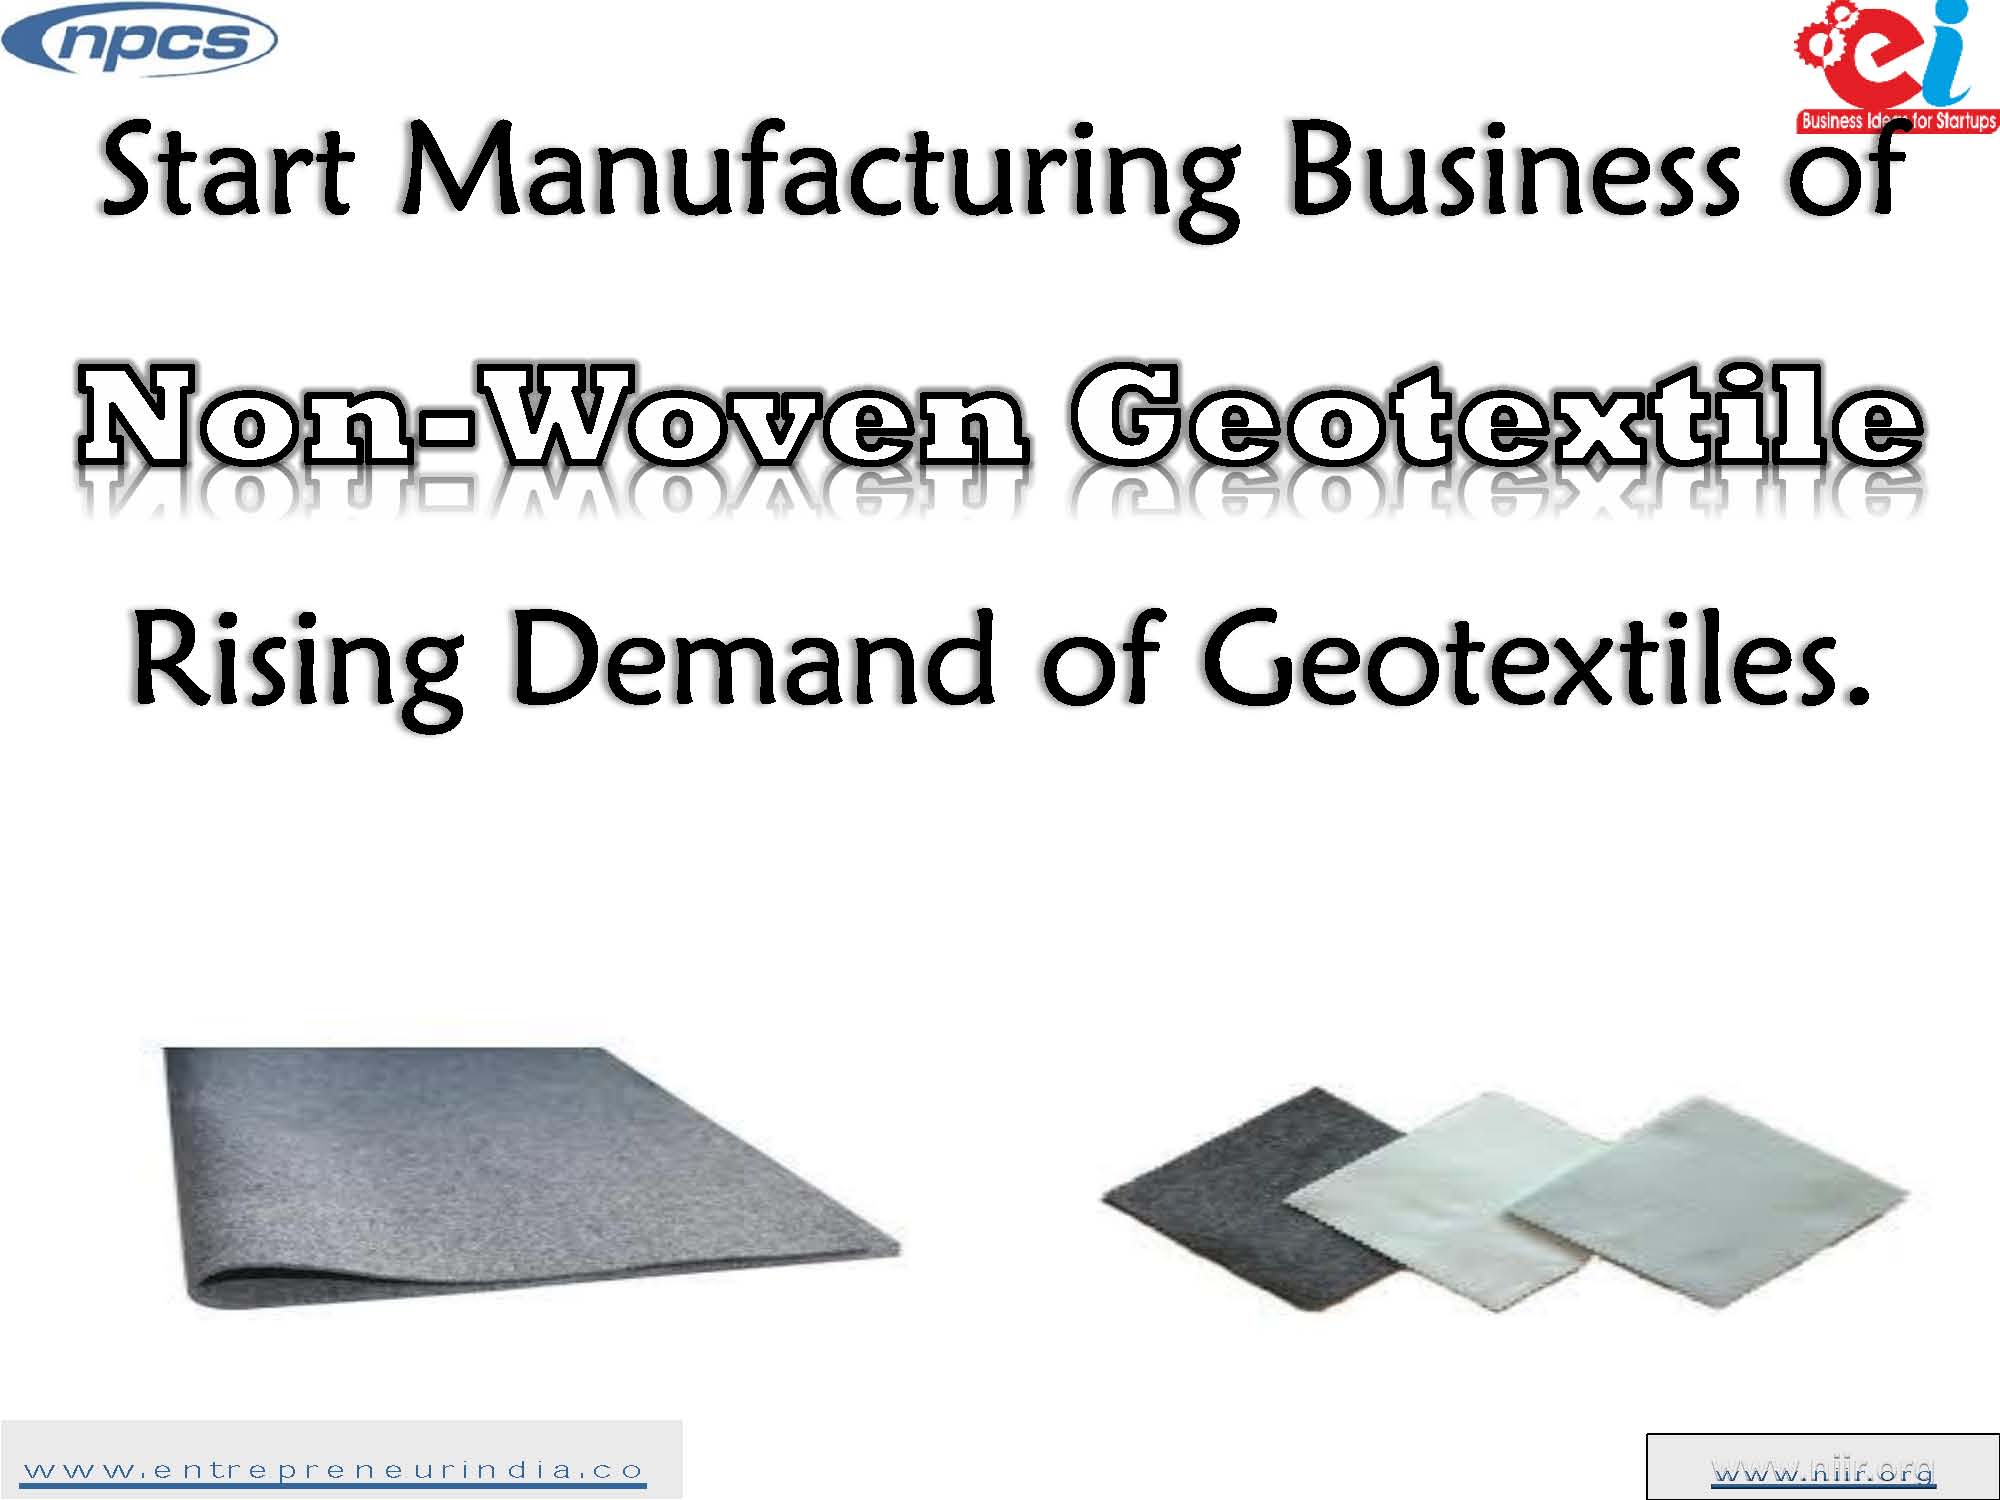 Start Manufacturing Business of NonWoven Geotextile Rising Demand of Geotextiles